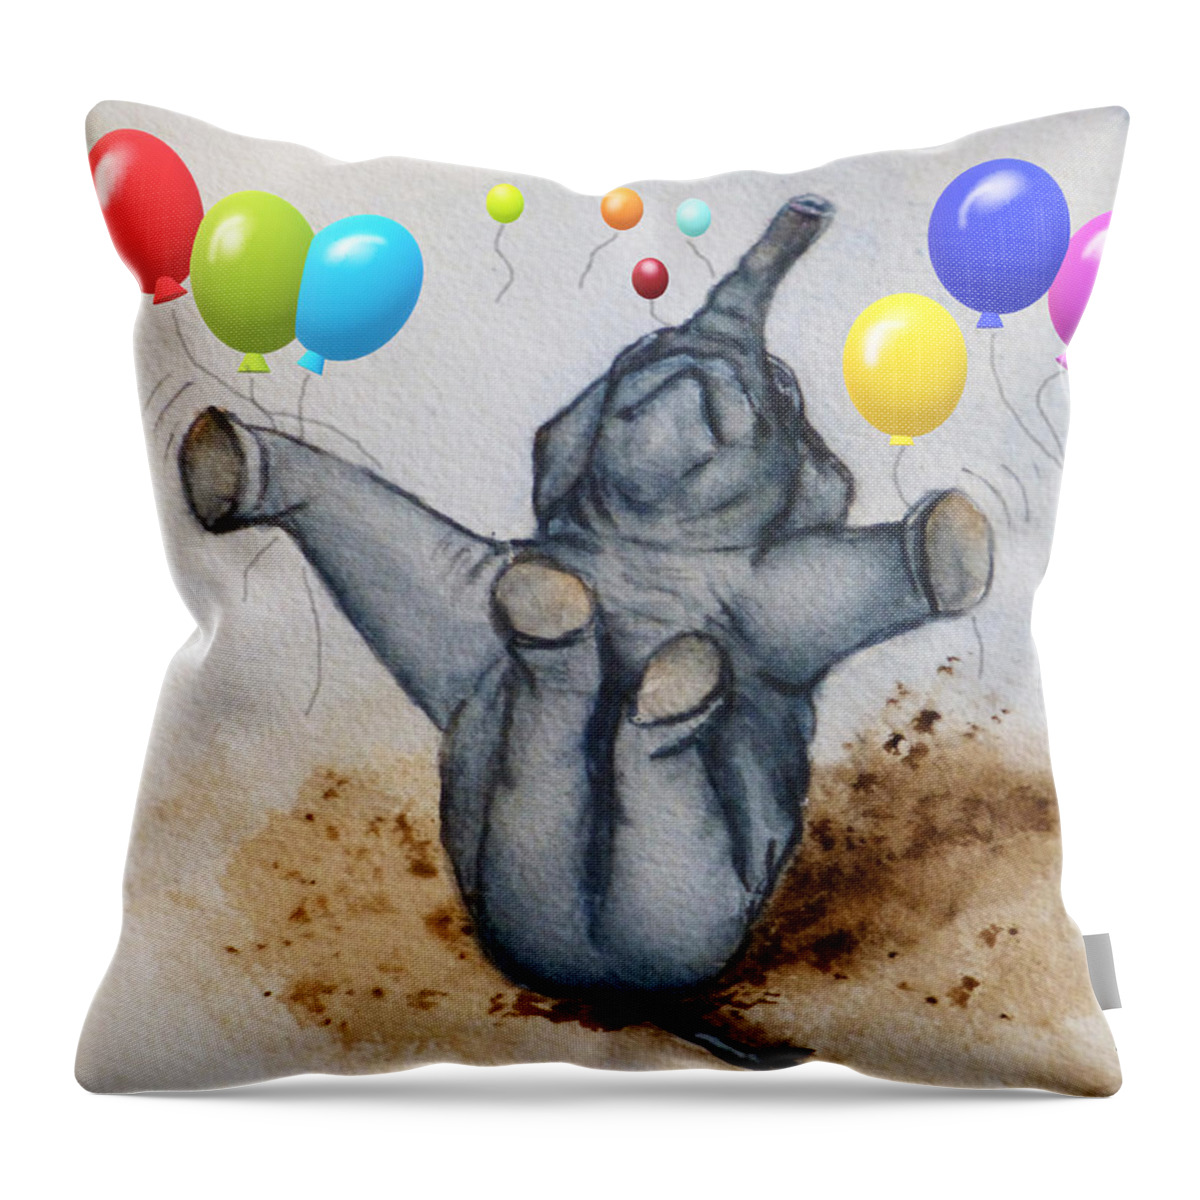 Hooray Throw Pillow featuring the painting Hooray Elephant by Kelly Mills